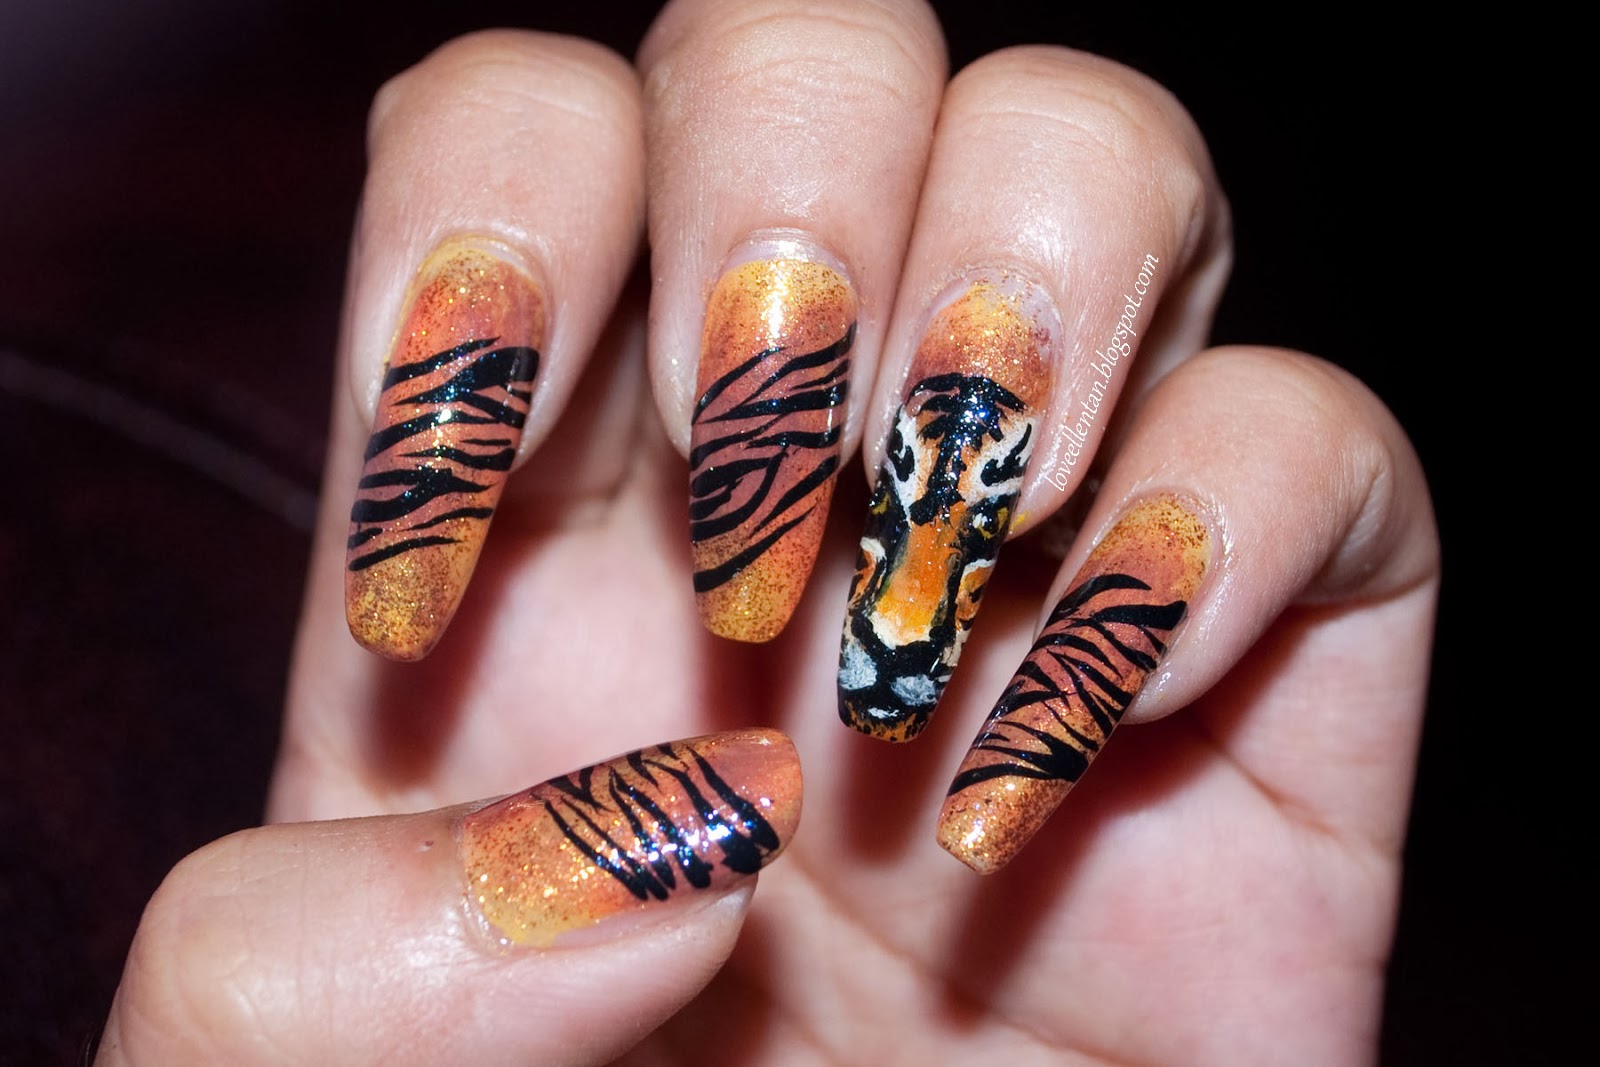 10 Trendy Year of the Tiger Nail Art Ideas for a Roaring Manicure - wide 9